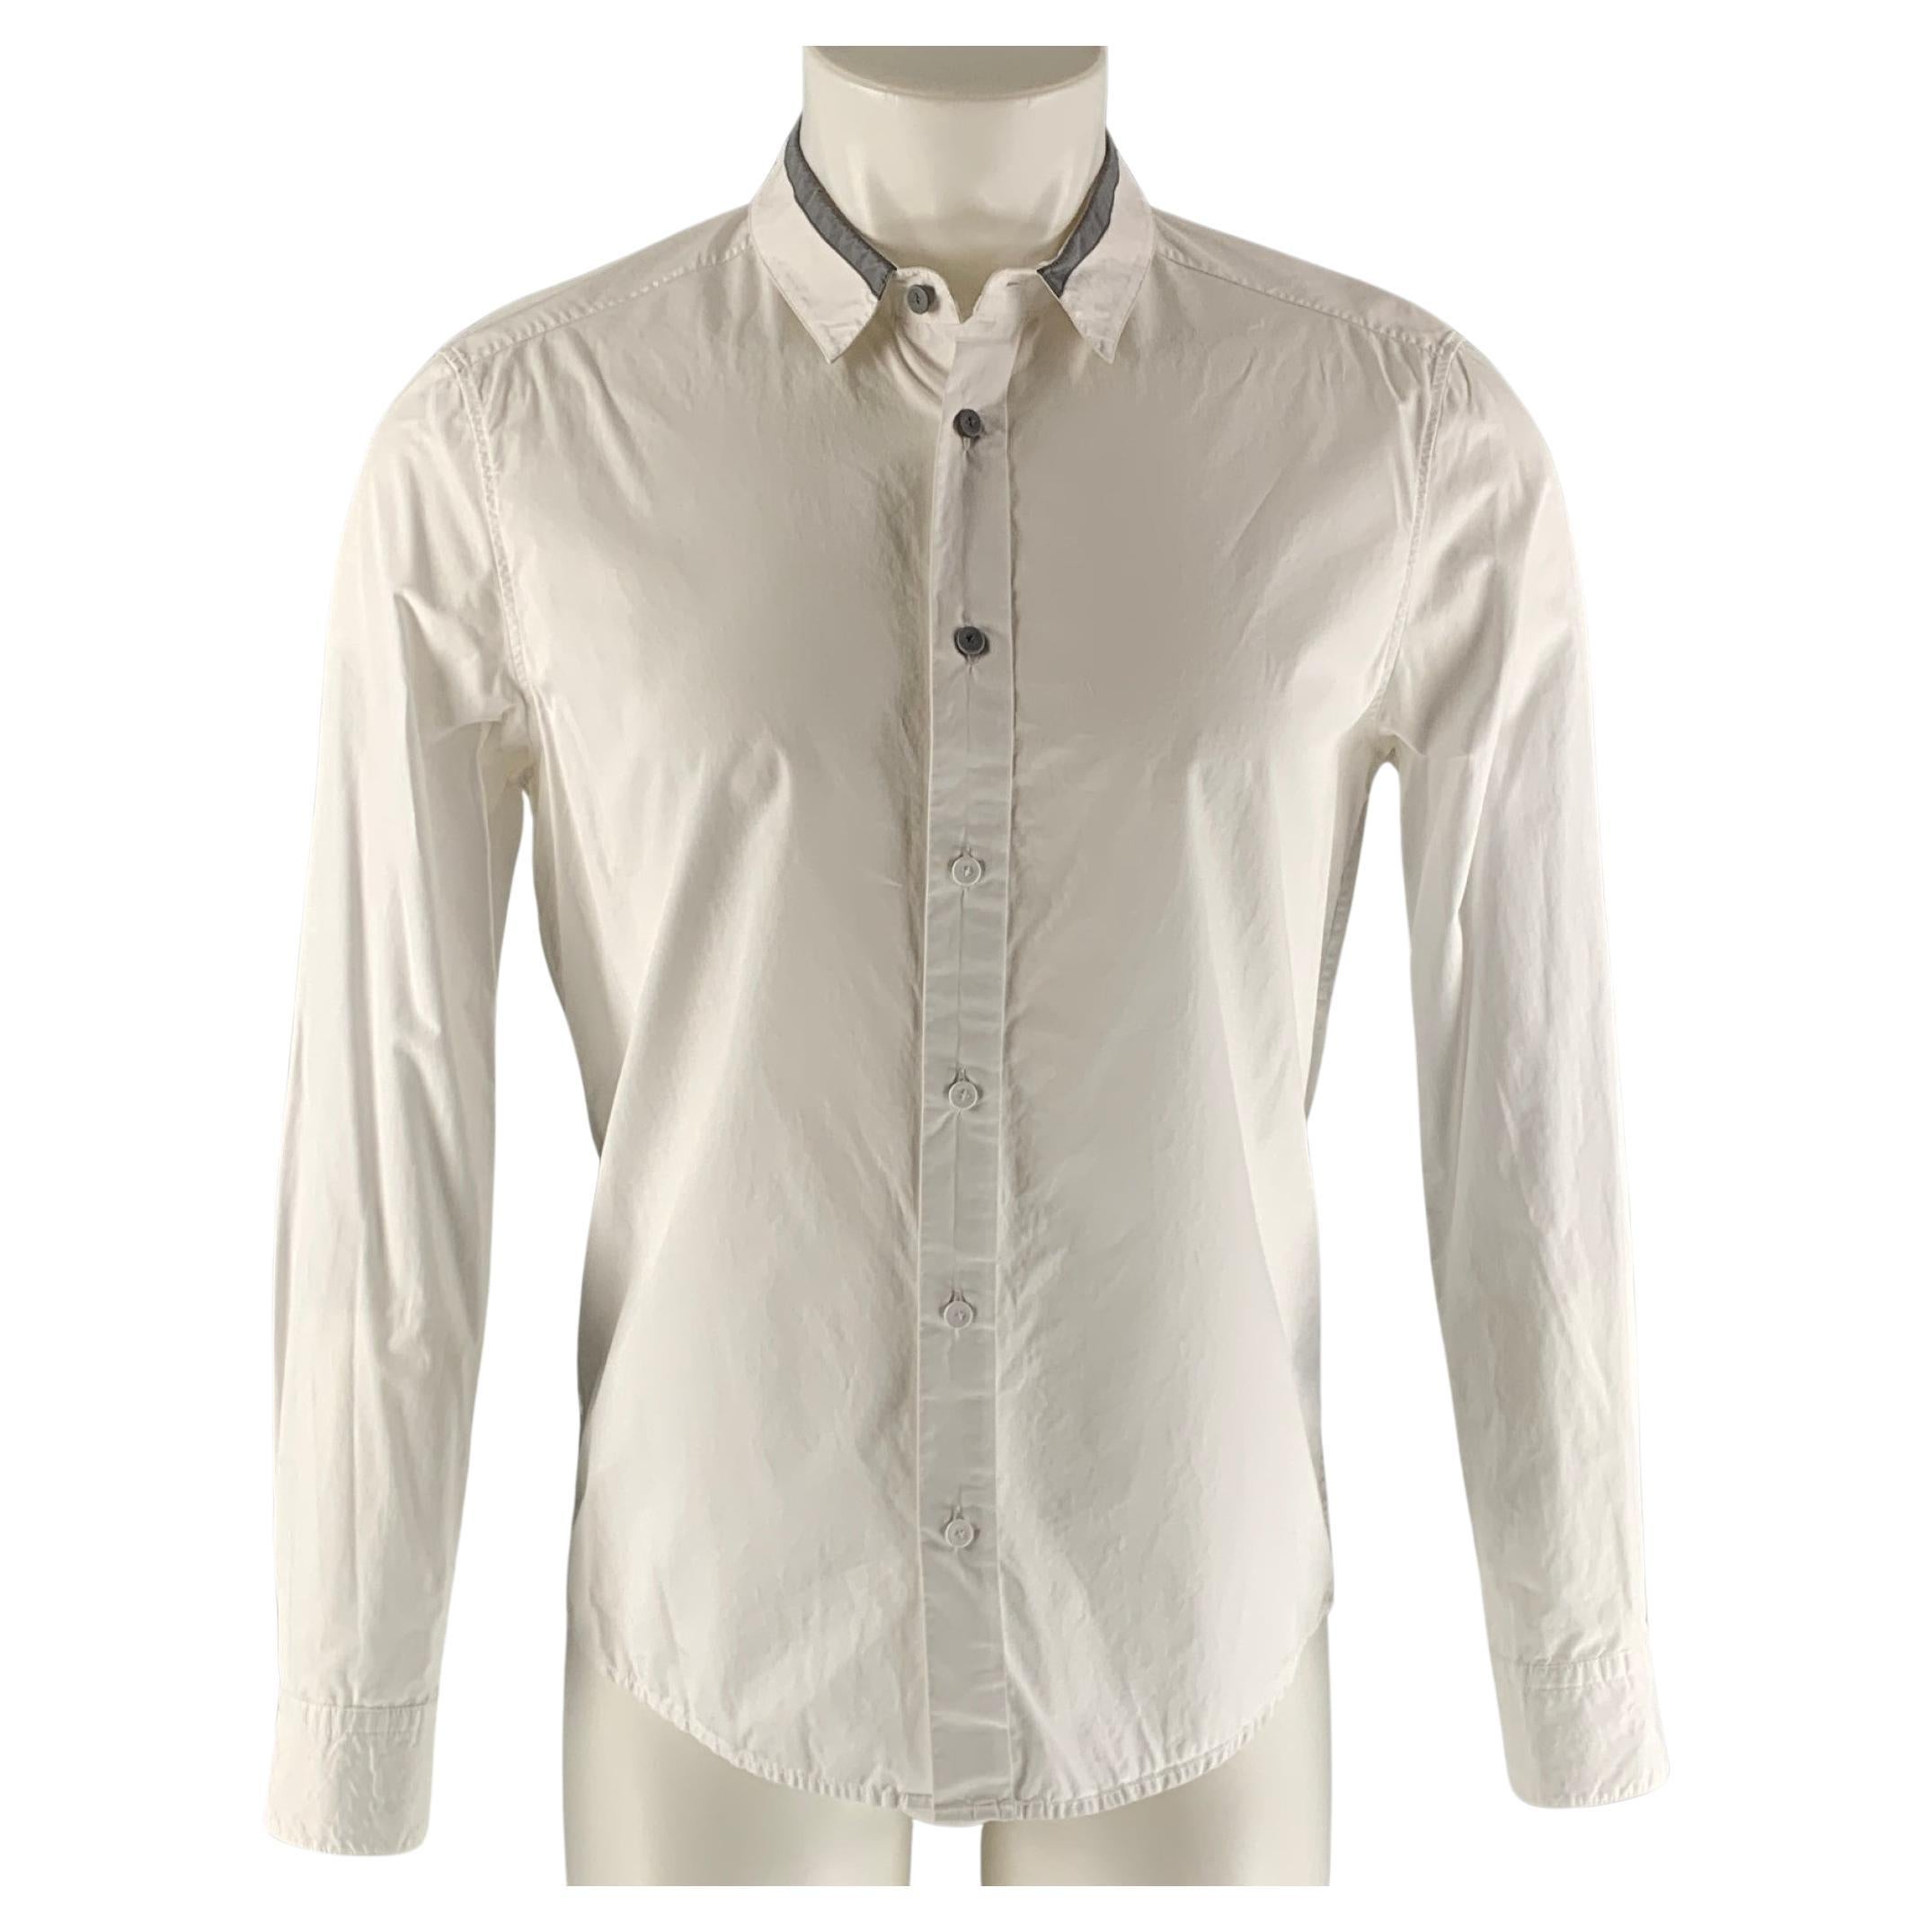 3.1 PHILLIP LIM Size S White Solid Cotton Button Up Long Sleeve Shirt